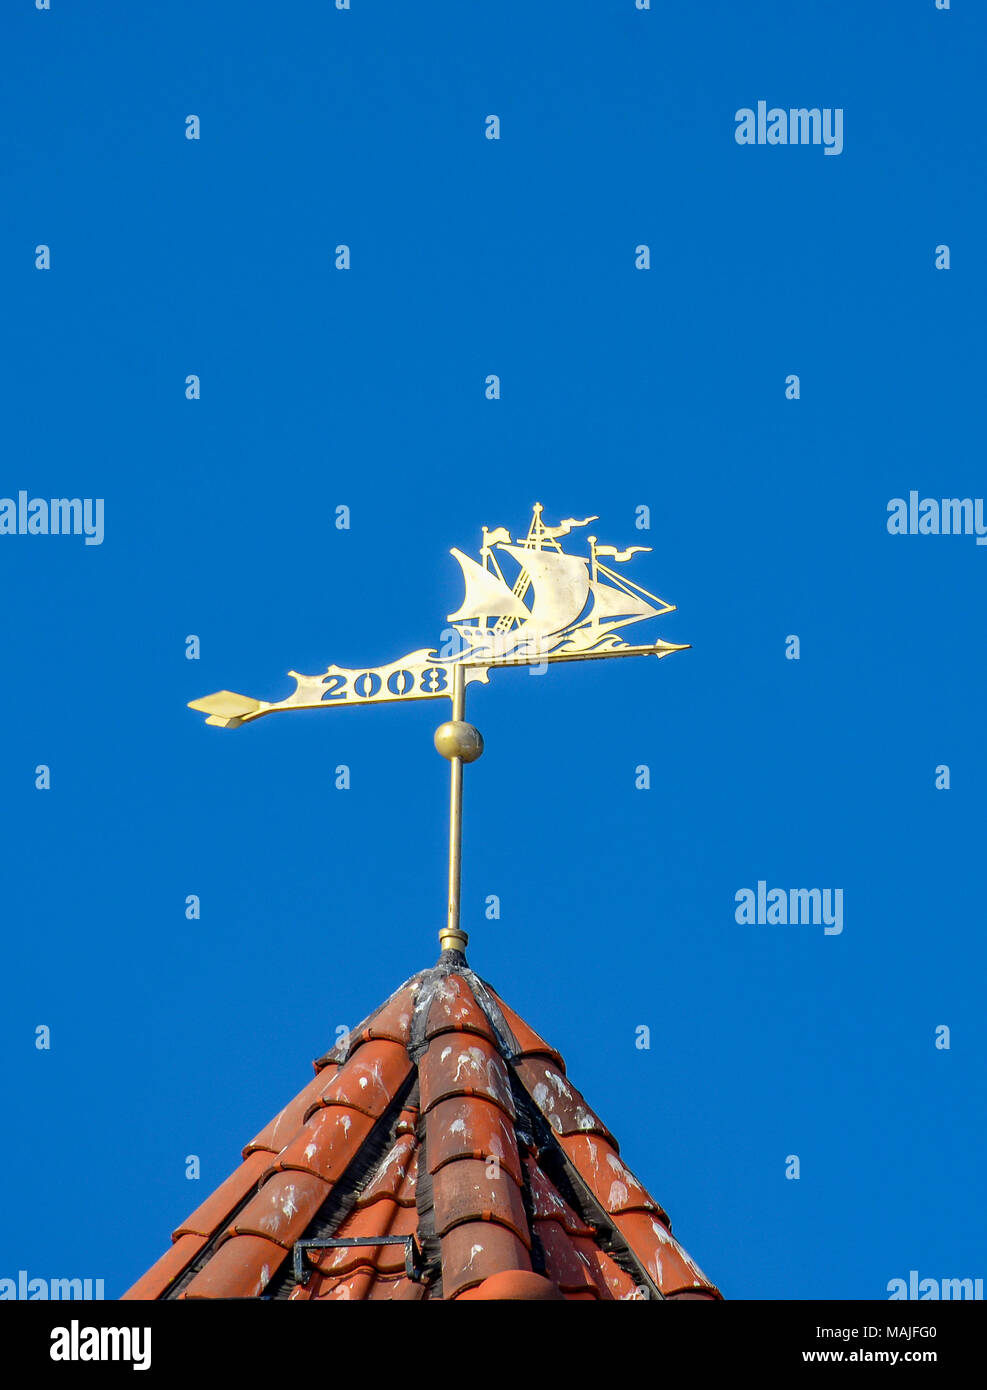 The weather vane on the roof of the tower. Stock Photo